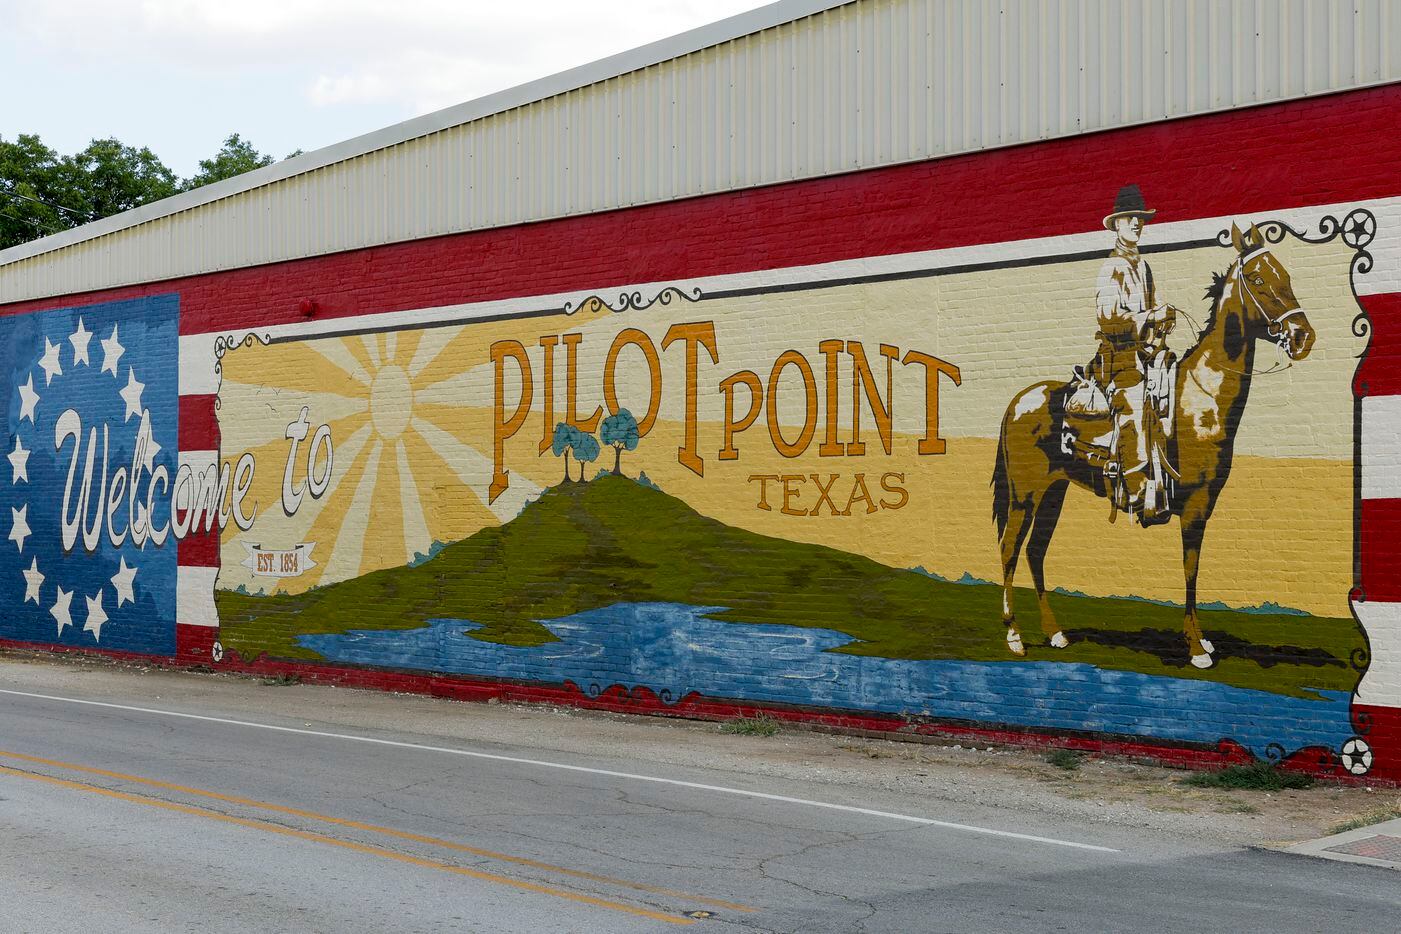 A mural welcomes people to Pilot Point.